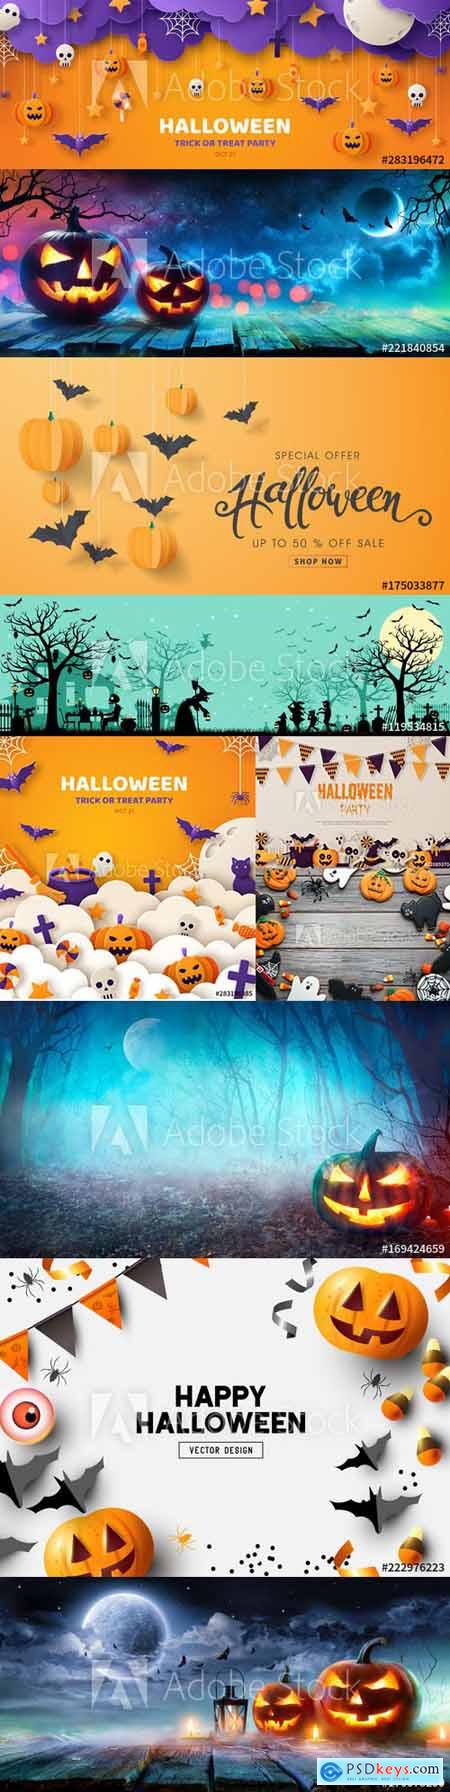 Set of Happy Halloween Background and Elements vol1